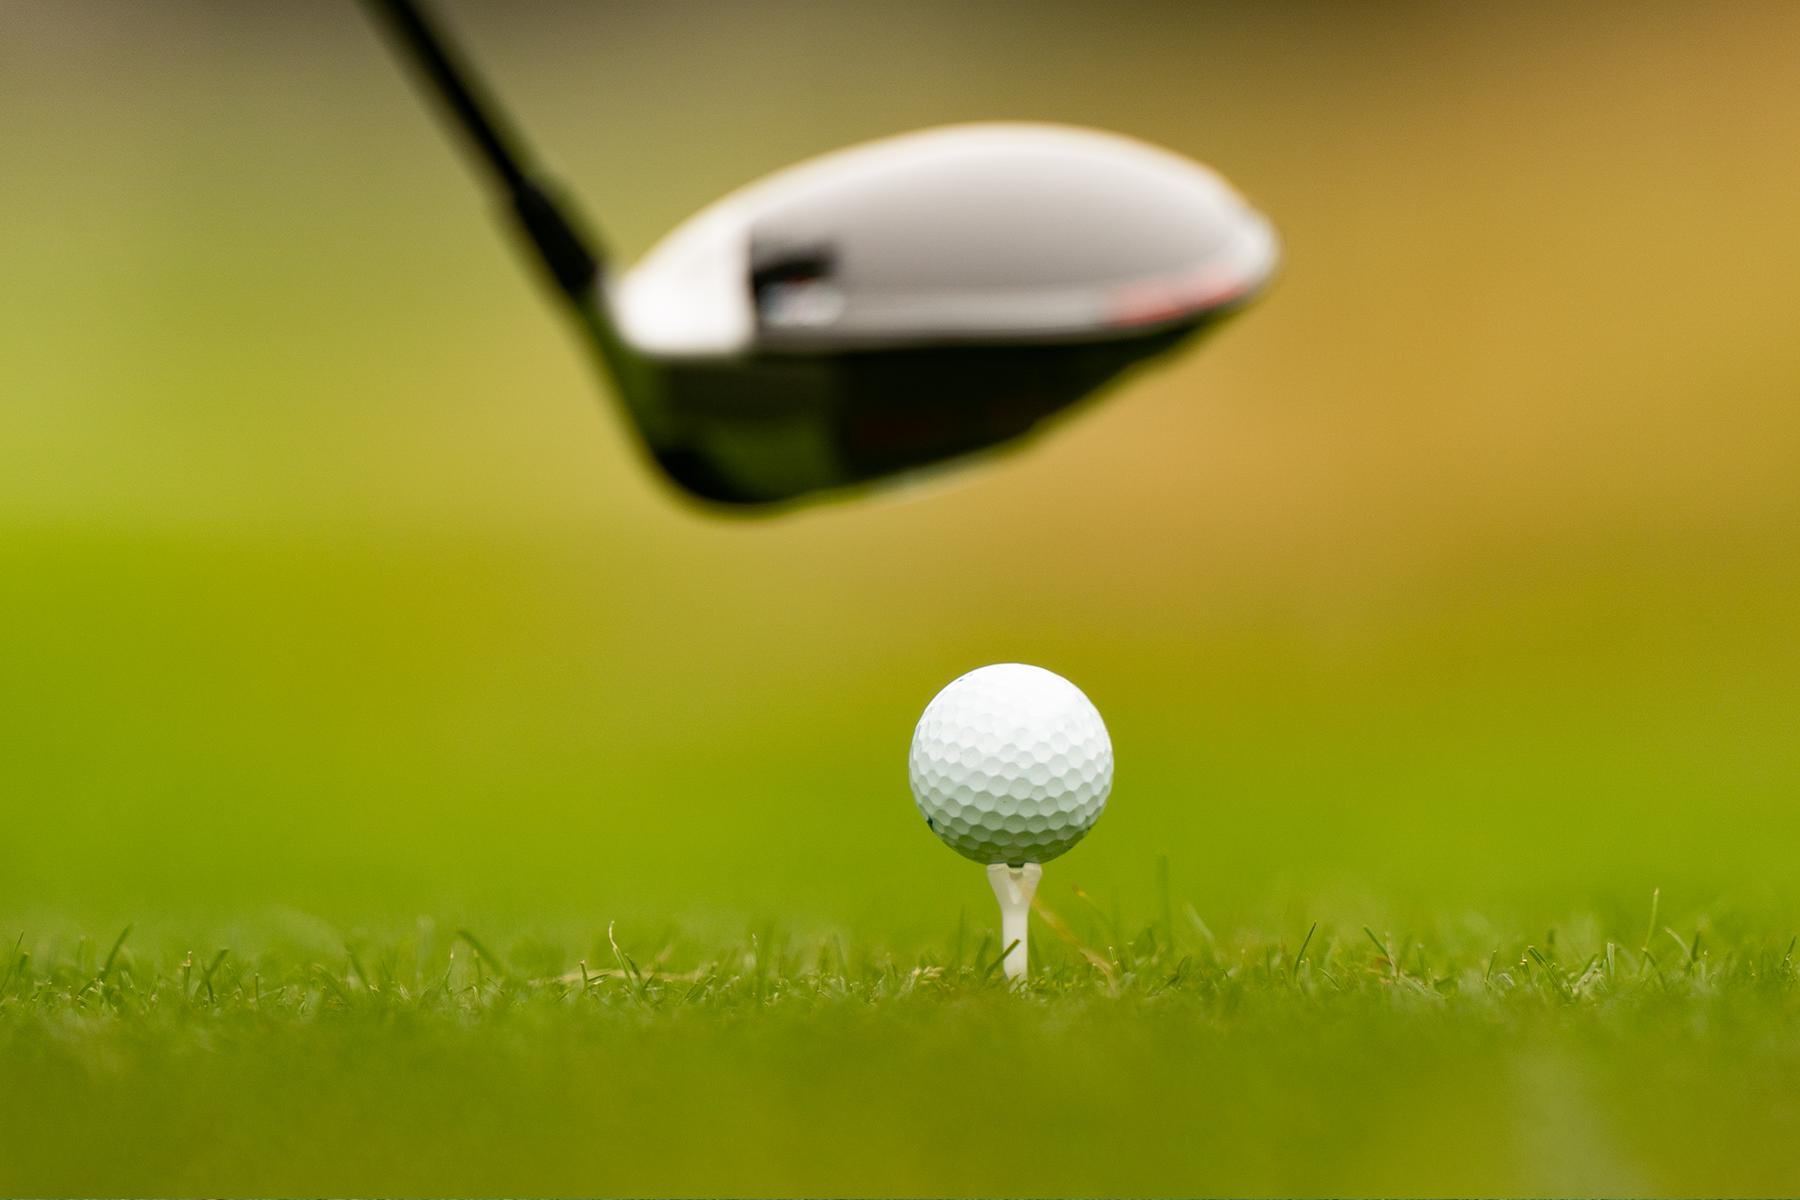 Improve Your Game via Online Golf Lessons - GolfDashBlog   Accelerate Your  Golf Performance